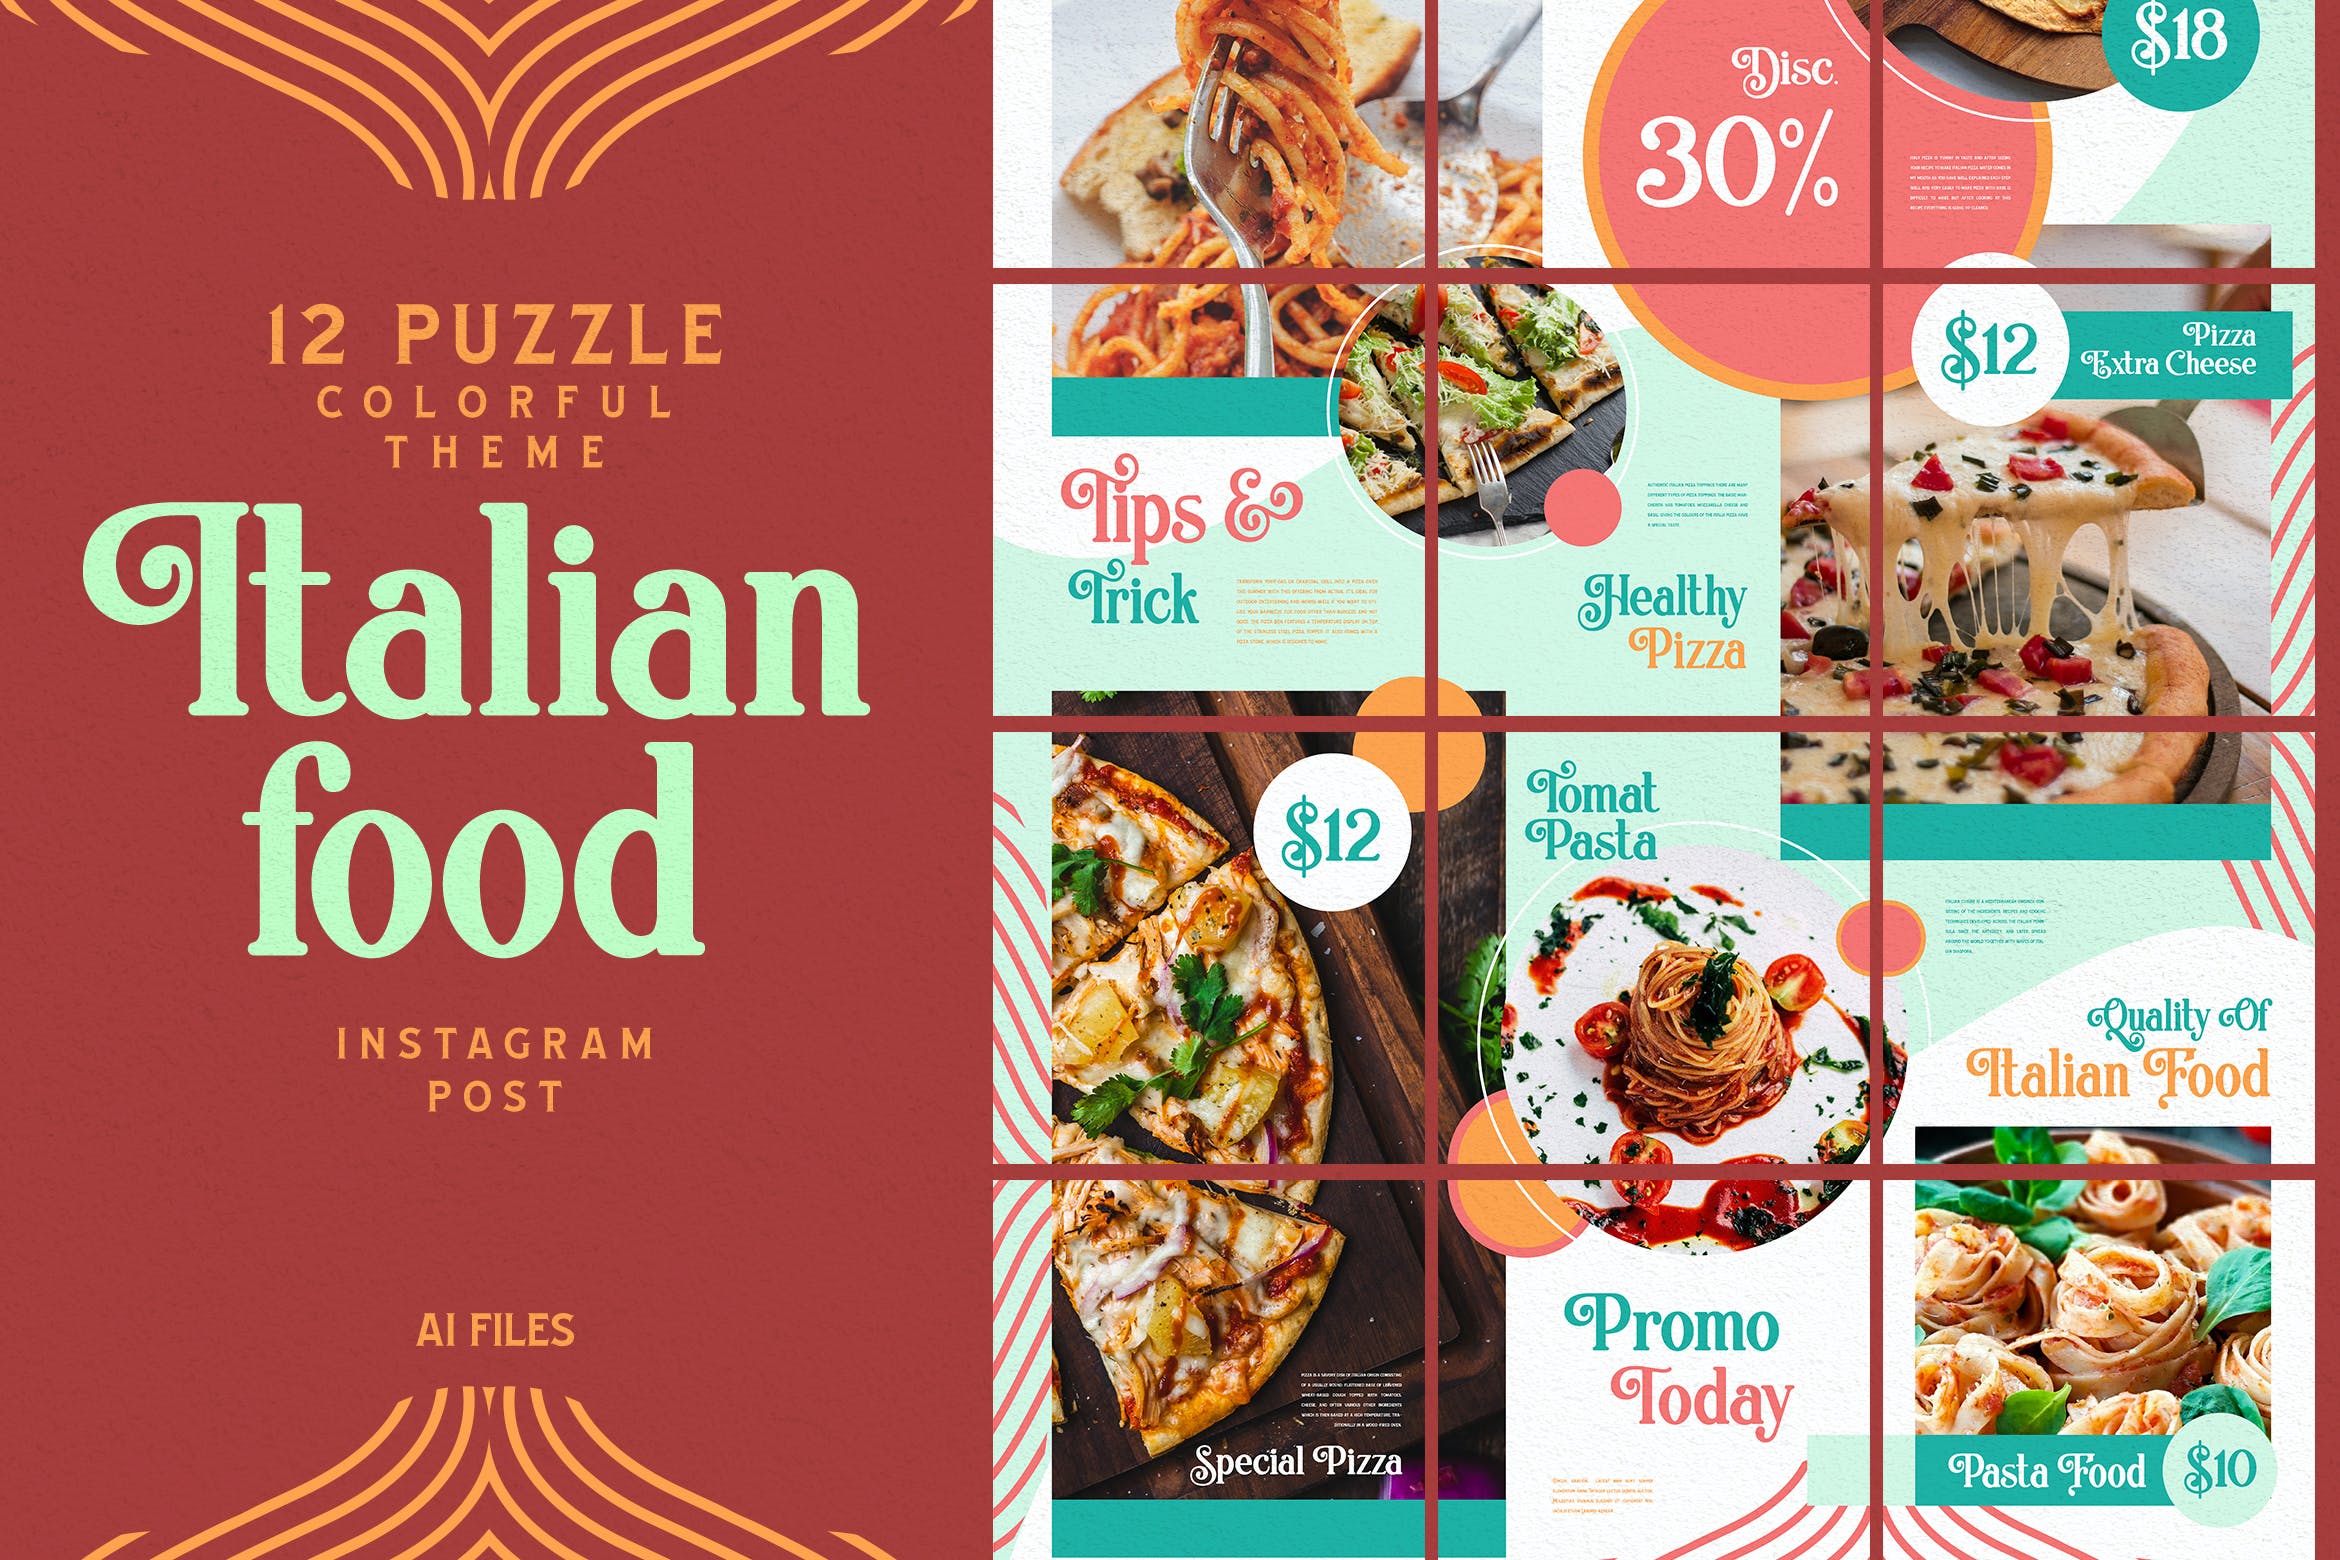 Colorful Puzzle Theme-Italian Food Instagram Post